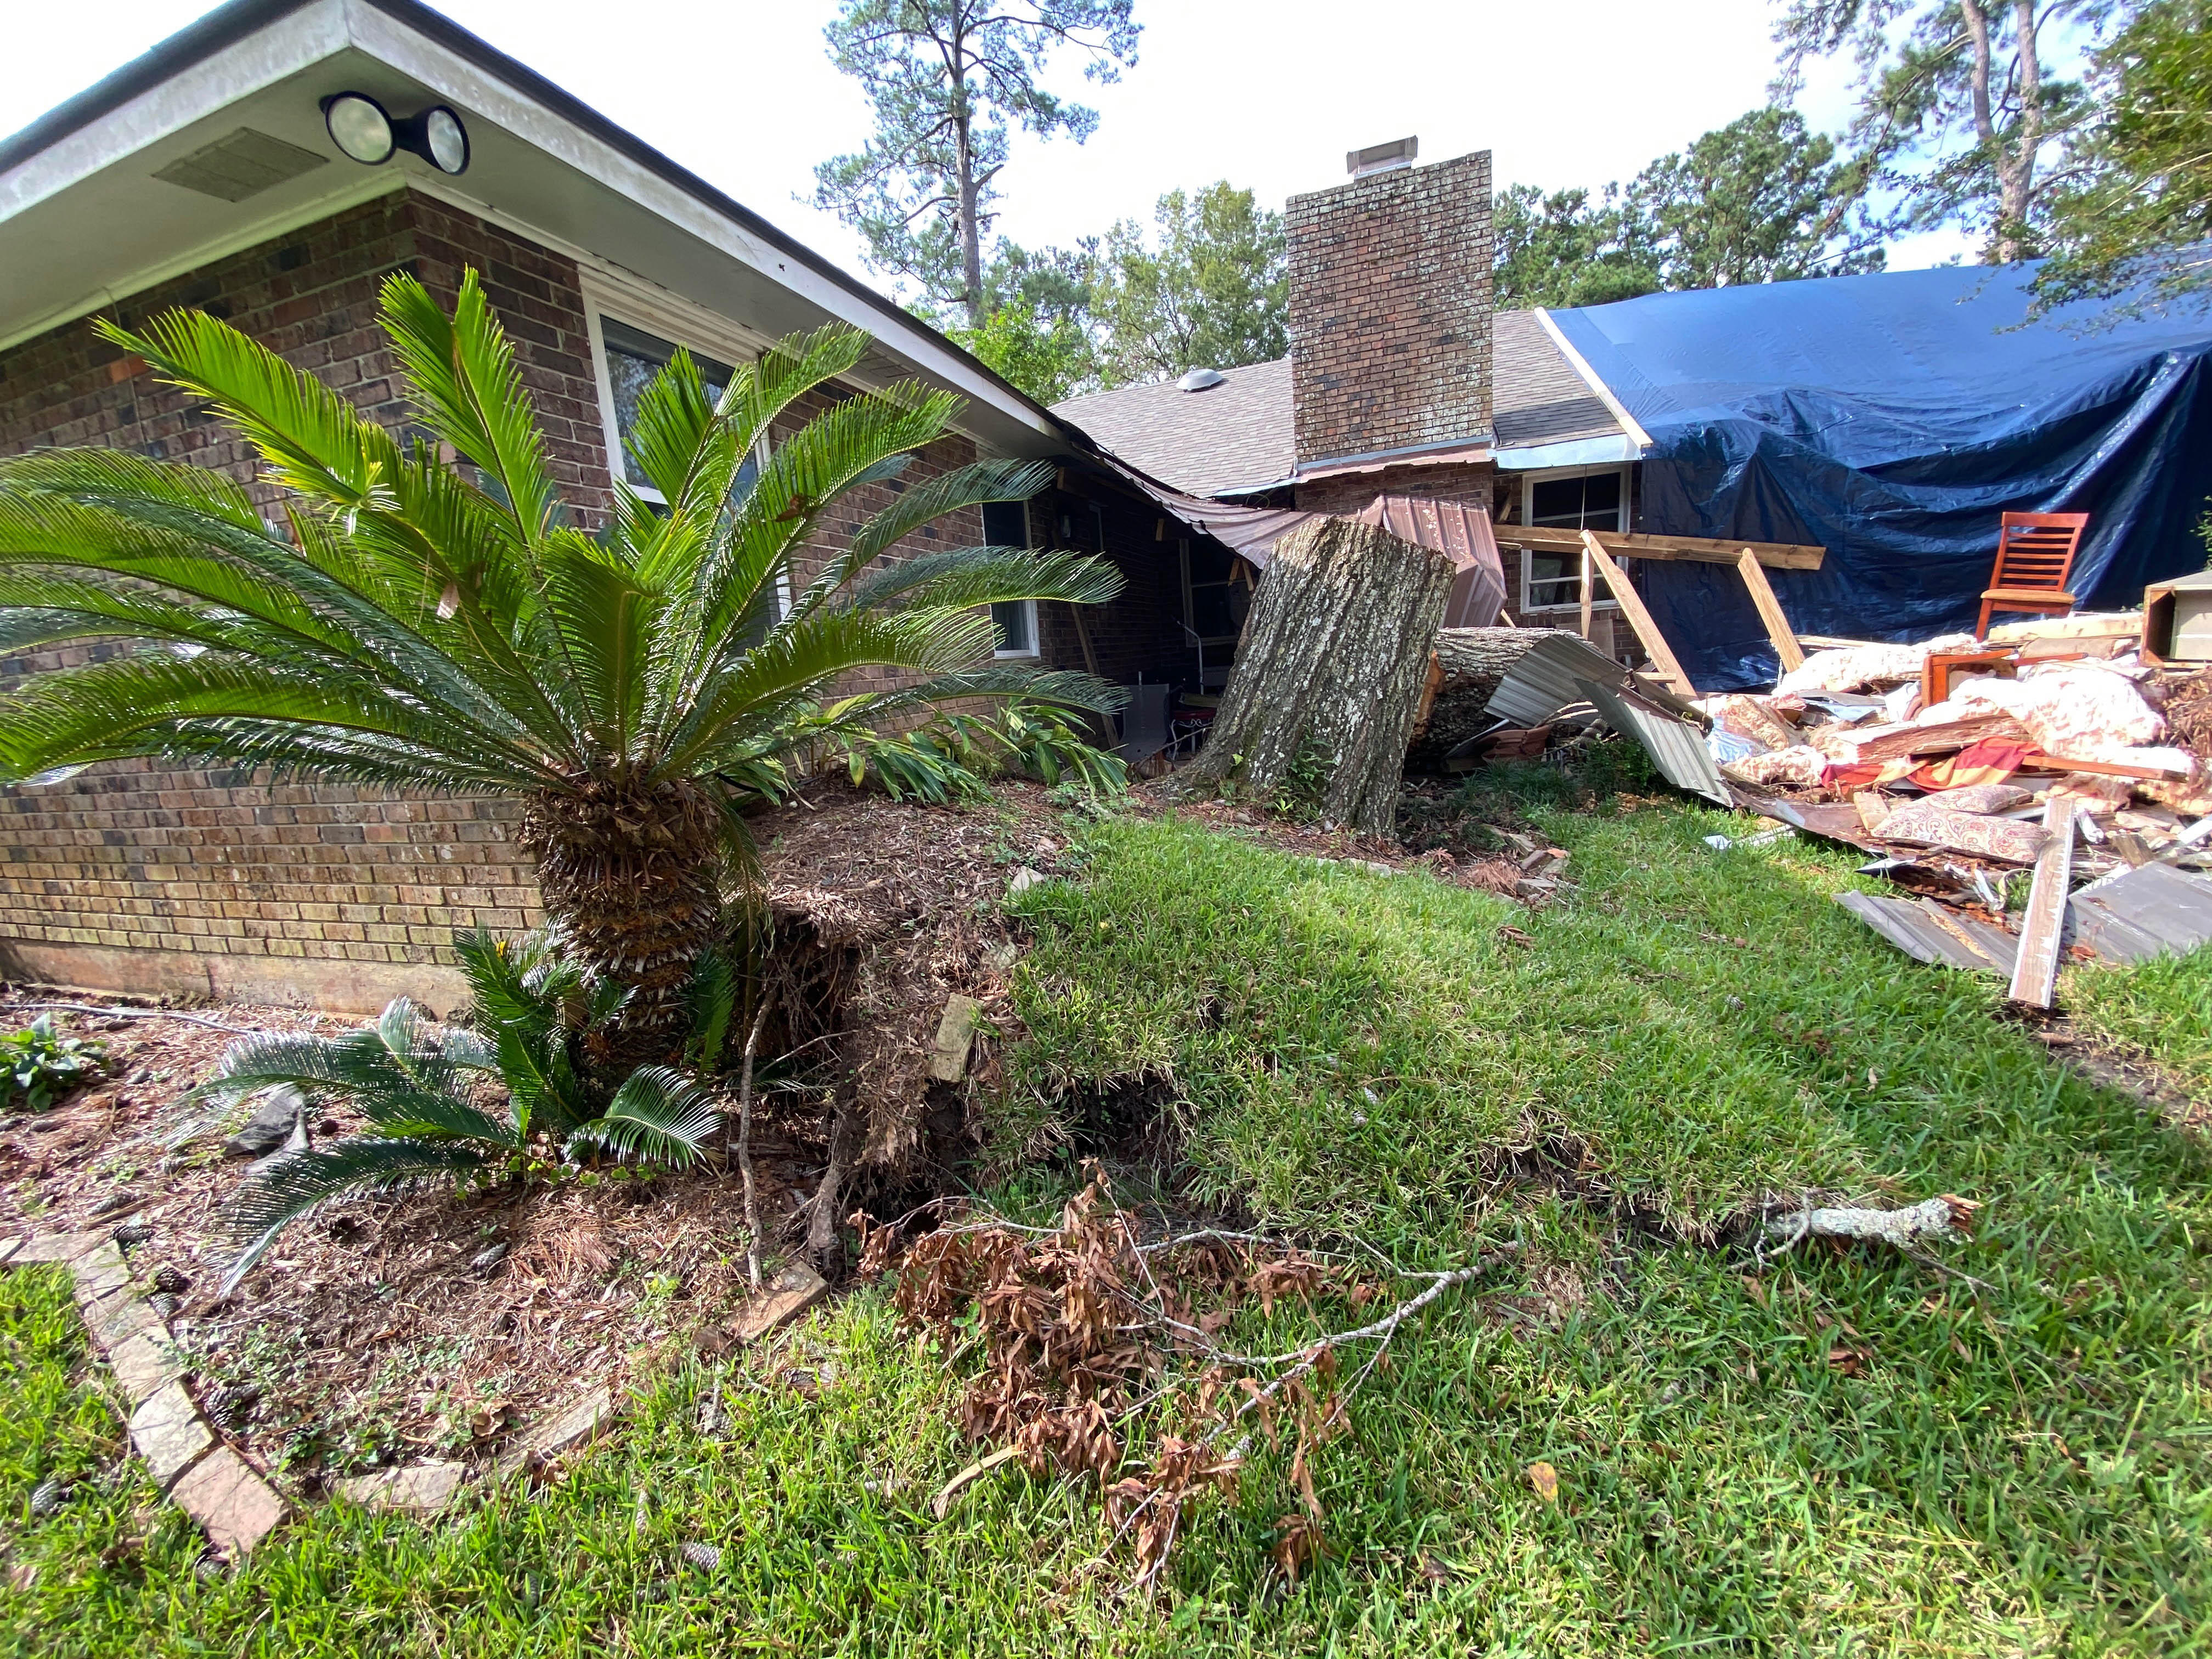 A storm in Santa Barbara can leave behind a ton of damage to your home or business. SERVPRO of Santa Barbara is highly trained and experienced in storm damage cleanup and restoration!